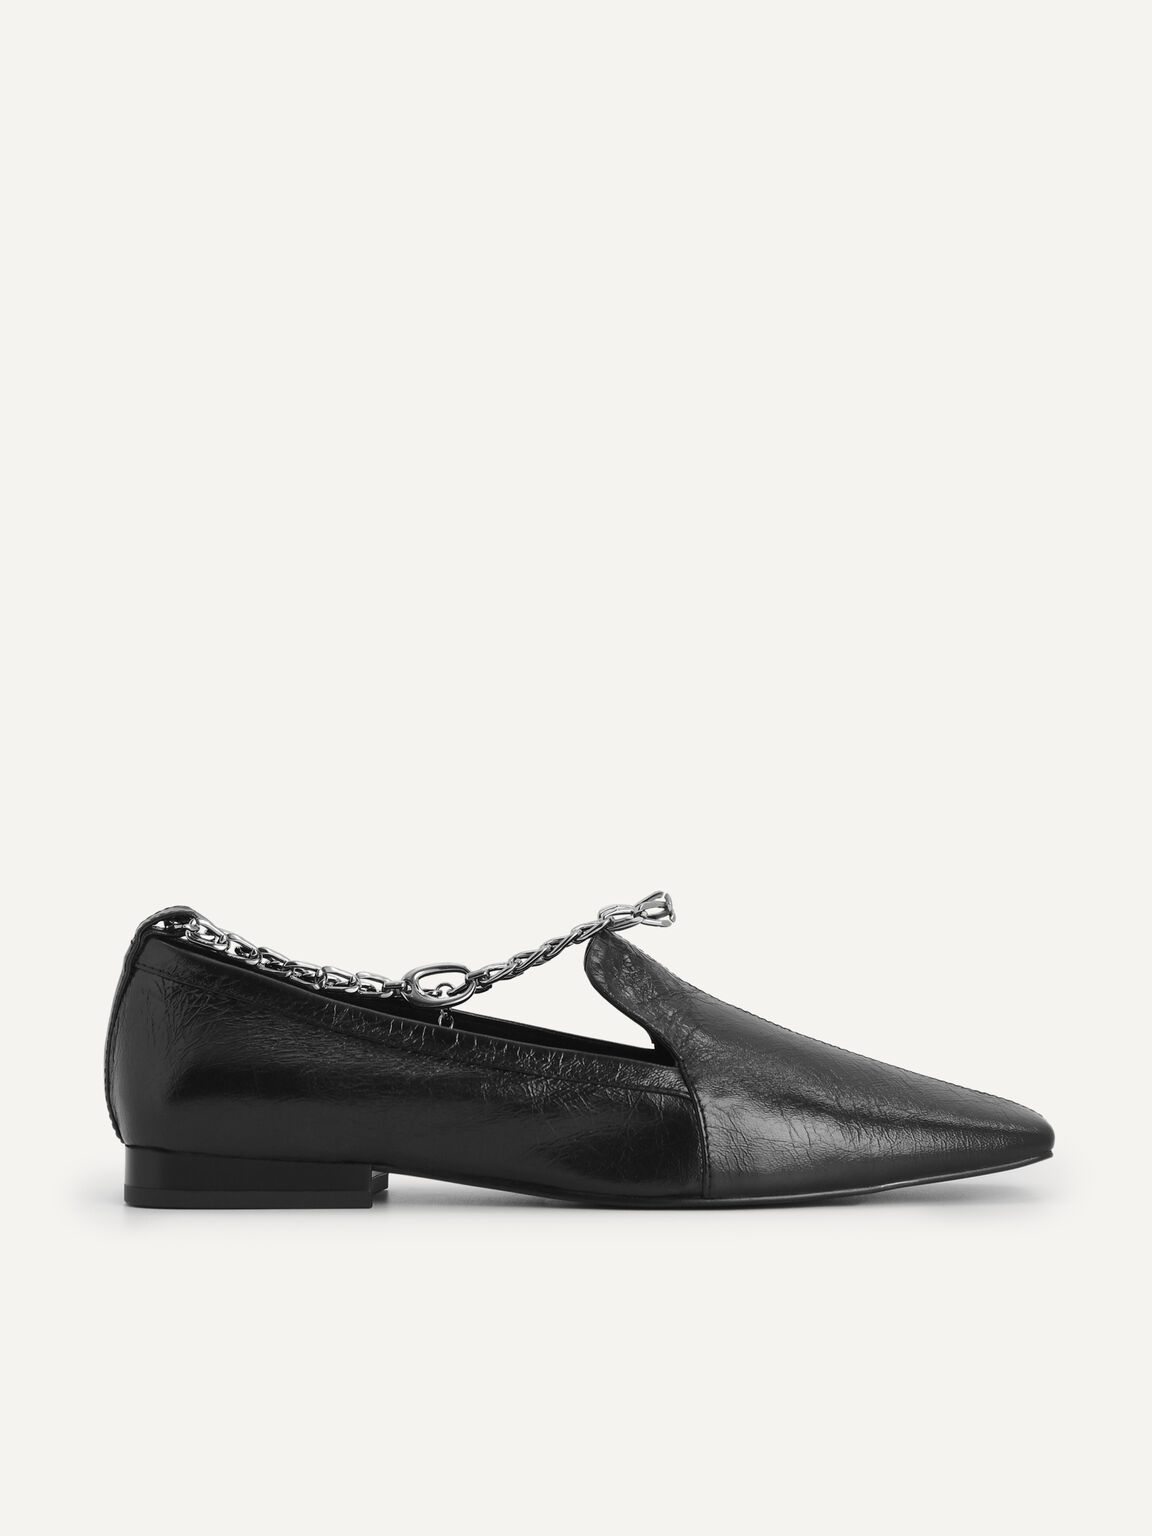 Chain-Strap Leather Loafers, Black